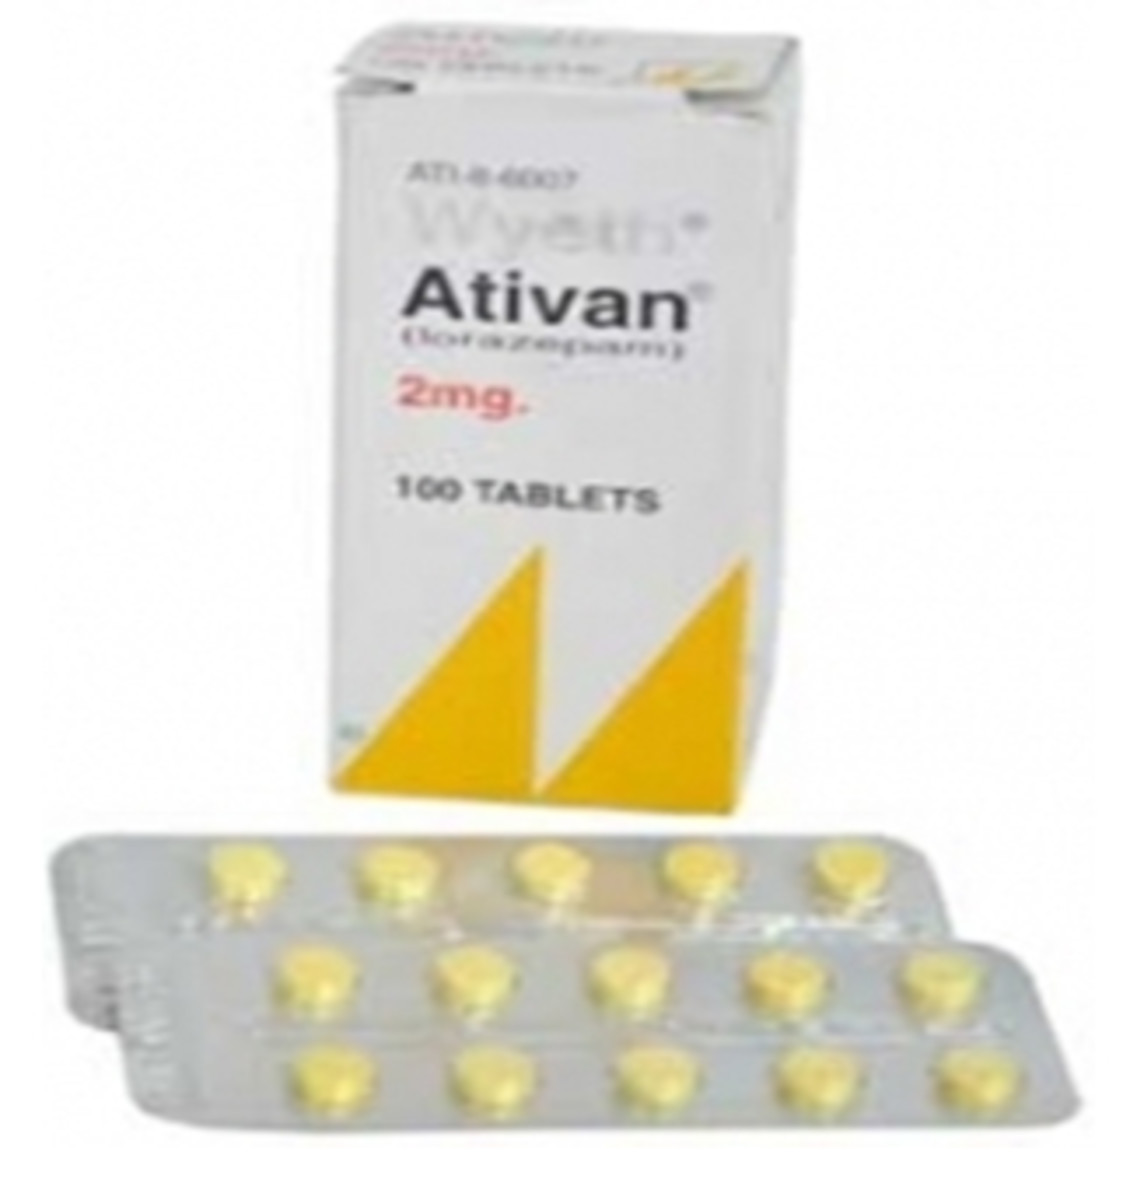 ativan for anxiety and panic attacks